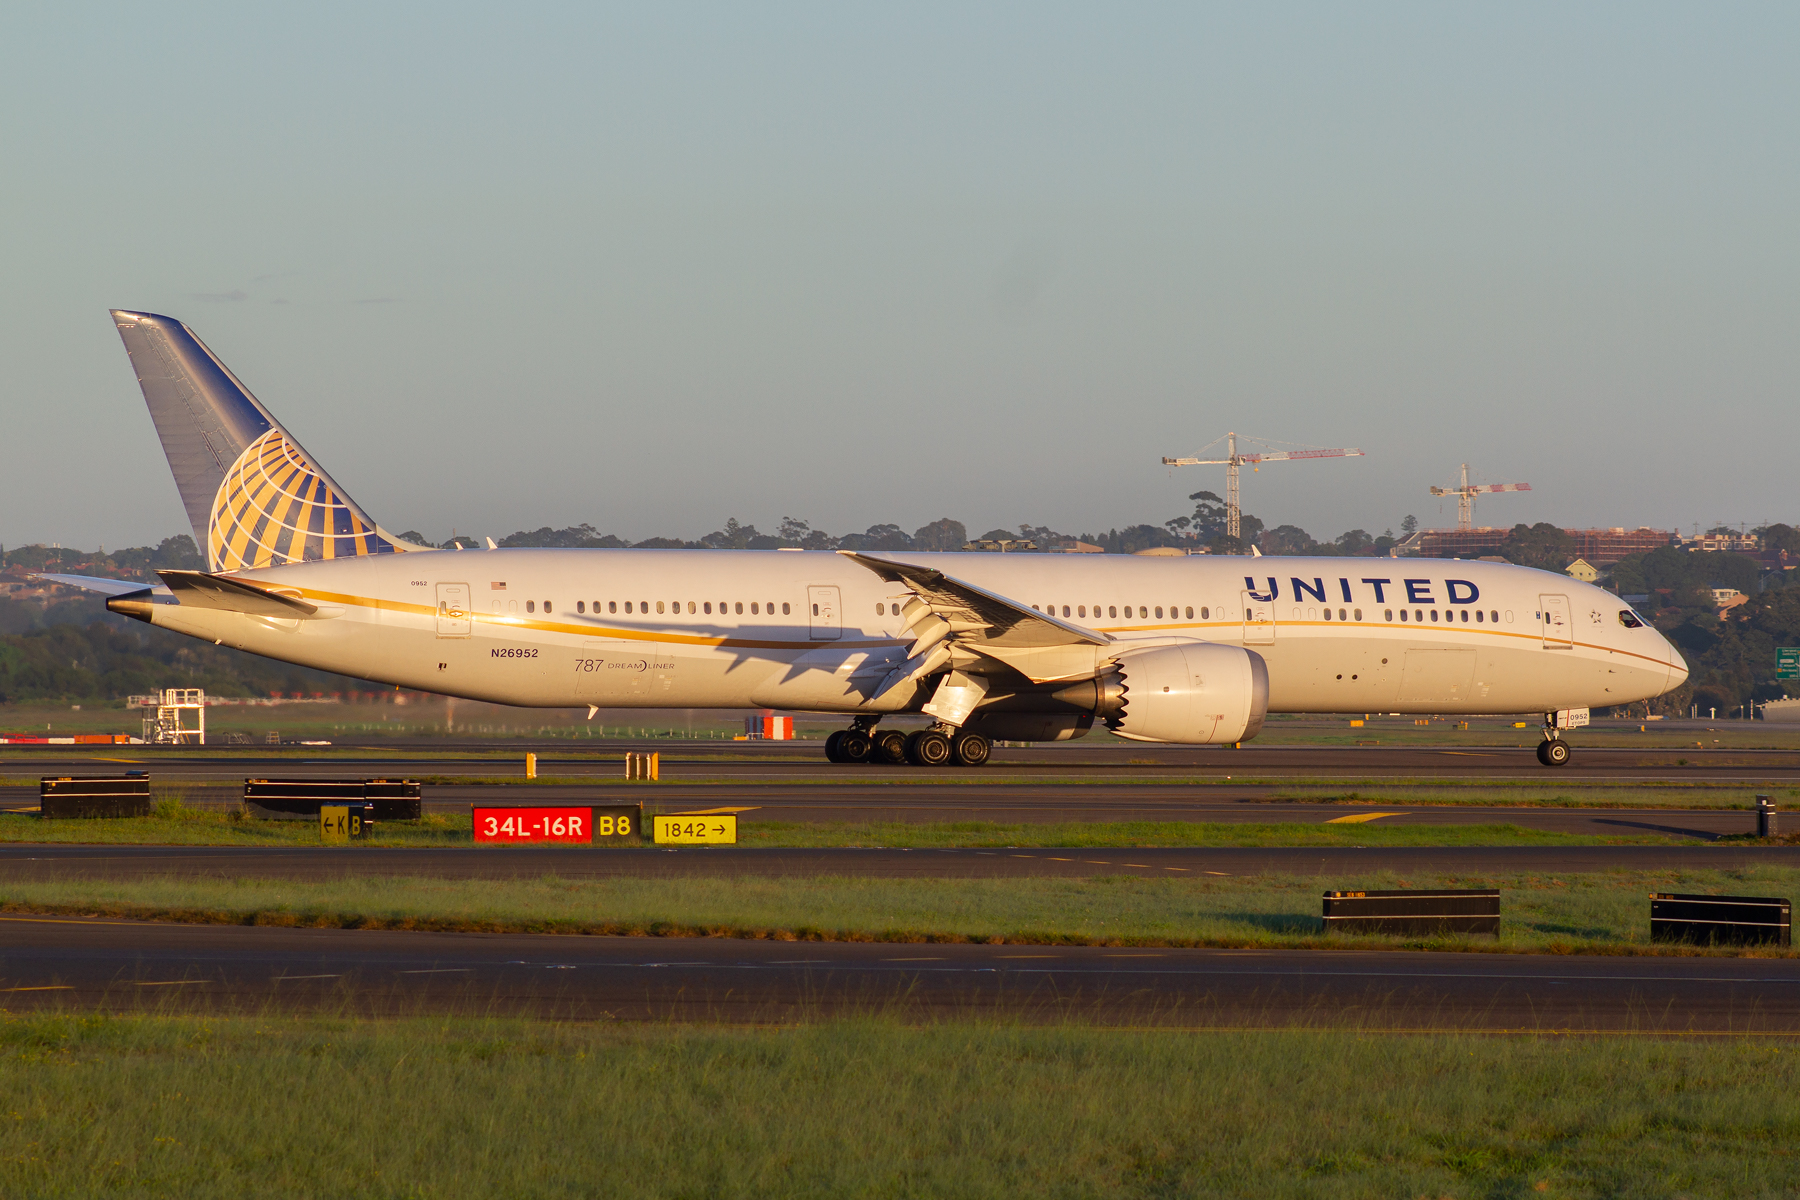 United Airlines Boeing 787-900 N26952 at Kingsford Smith